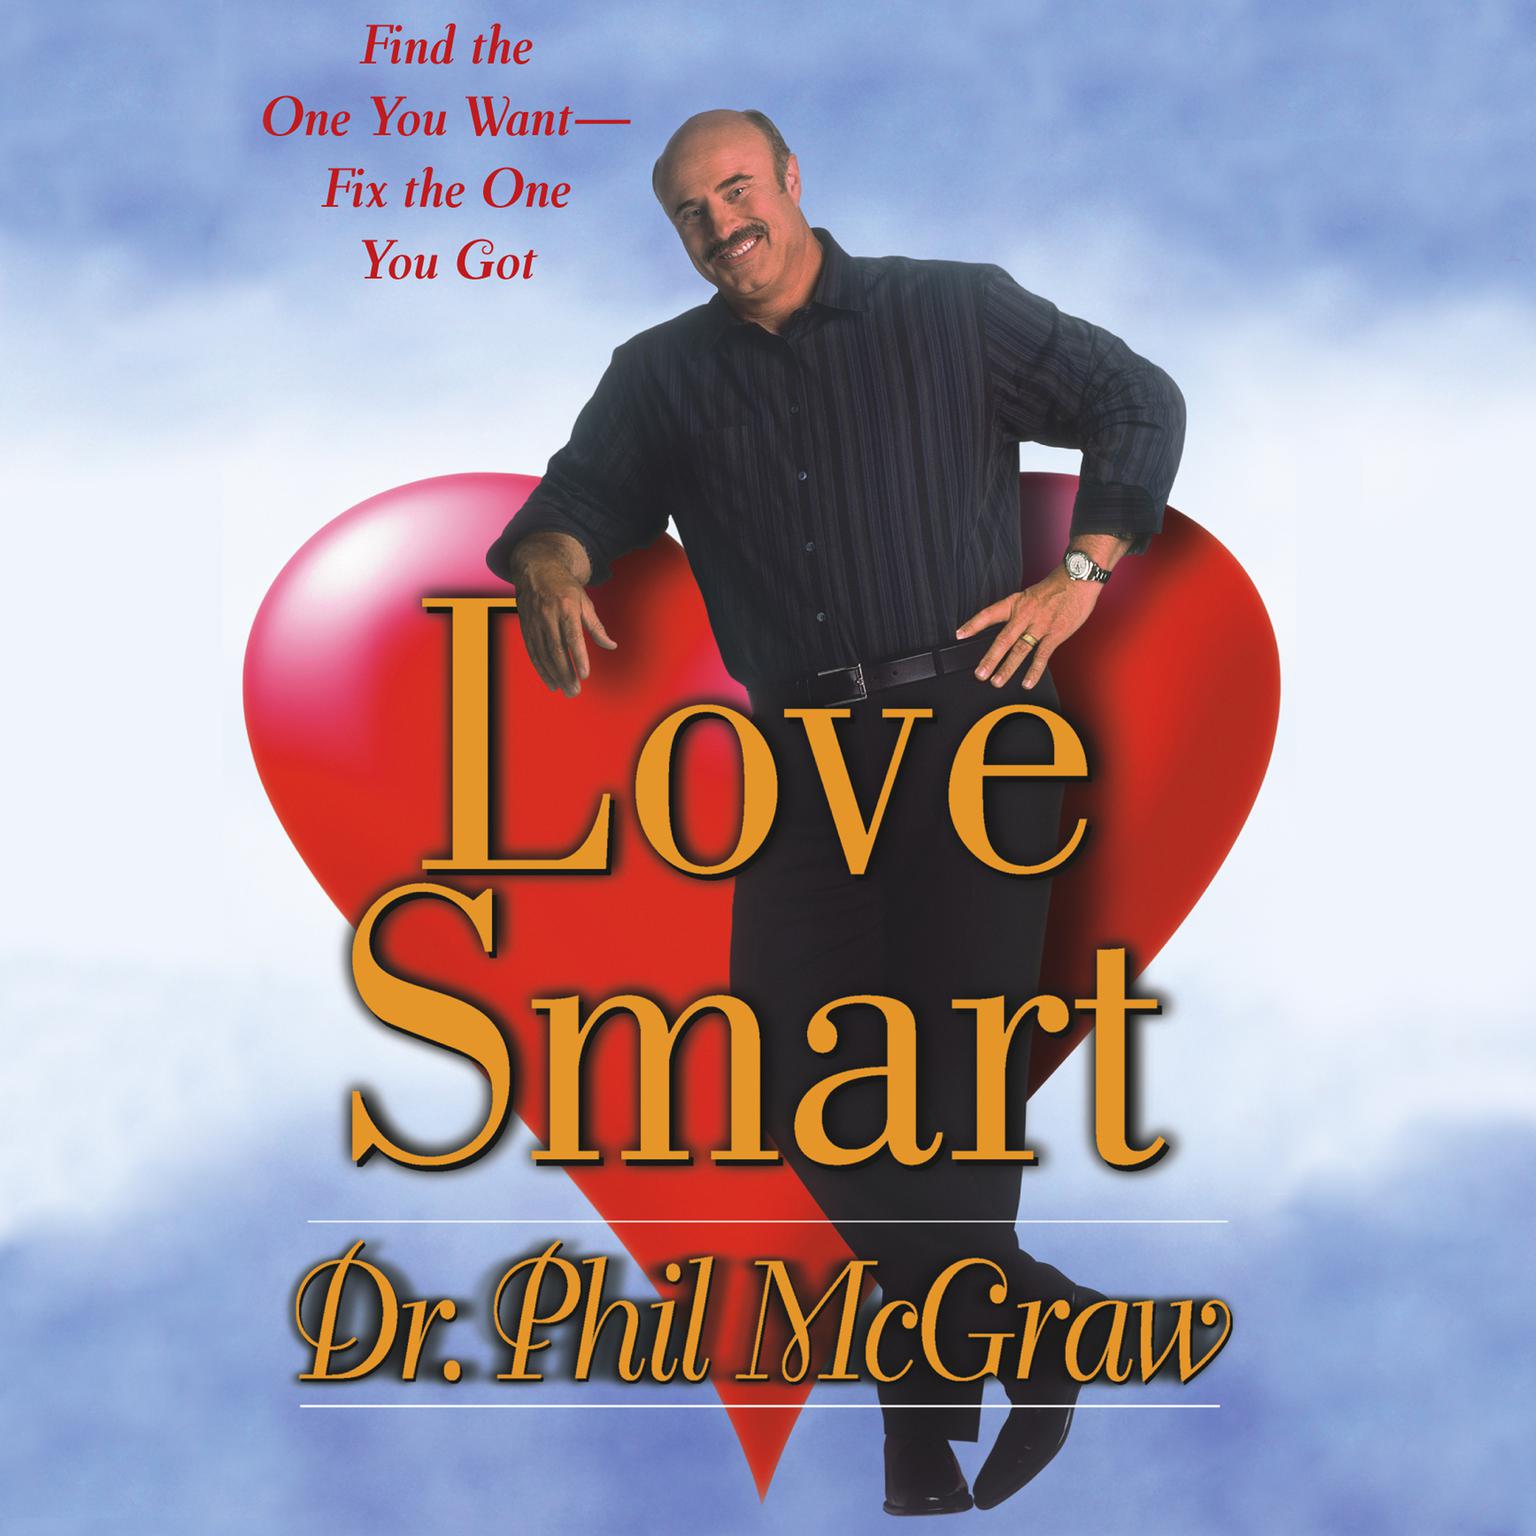 Love Smart (Abridged): Find the One You Want—Fix the One You Got Audiobook, by Phil McGraw